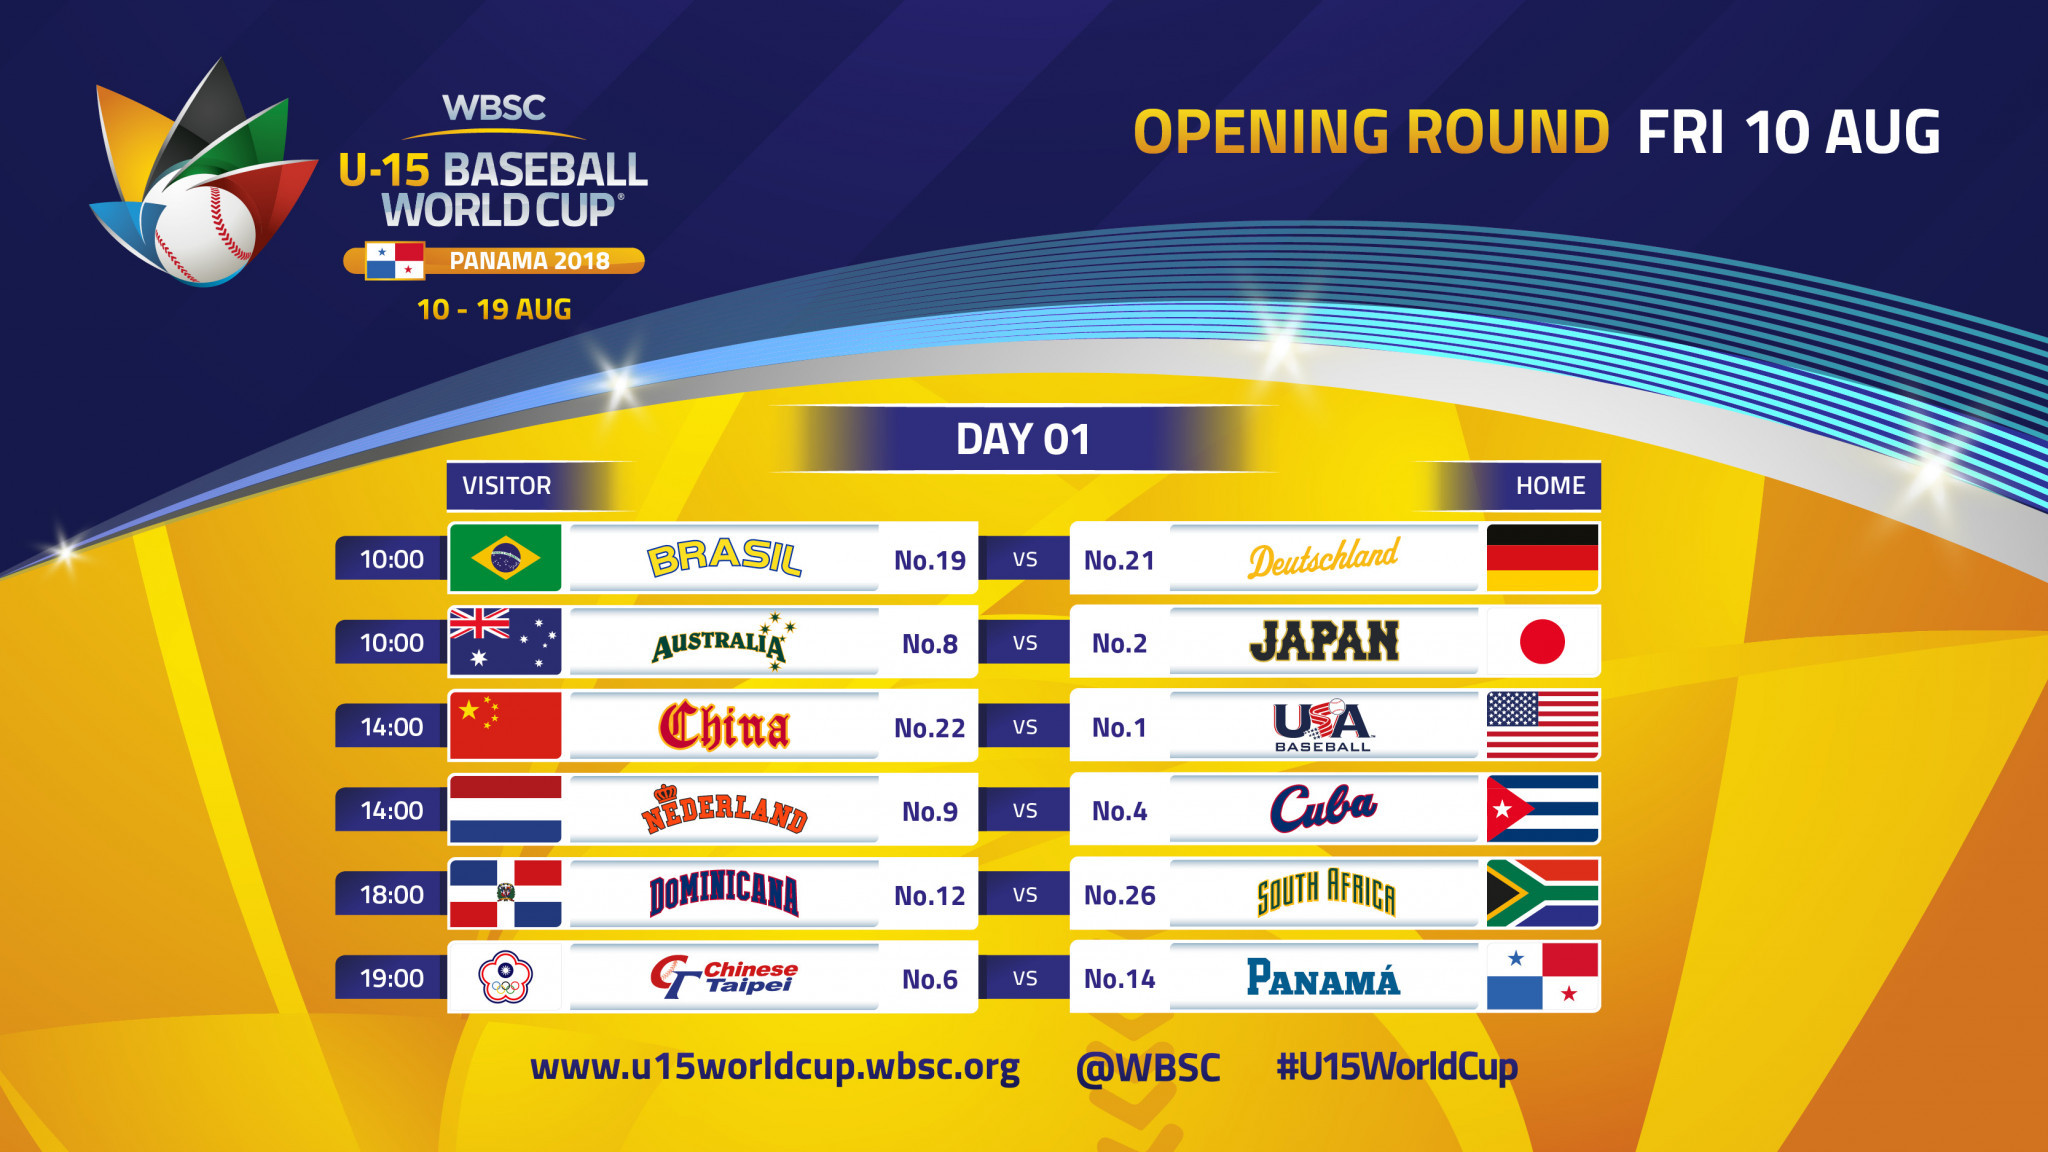 Game schedule announced for WBSC Under15 Baseball World Cup in Panama